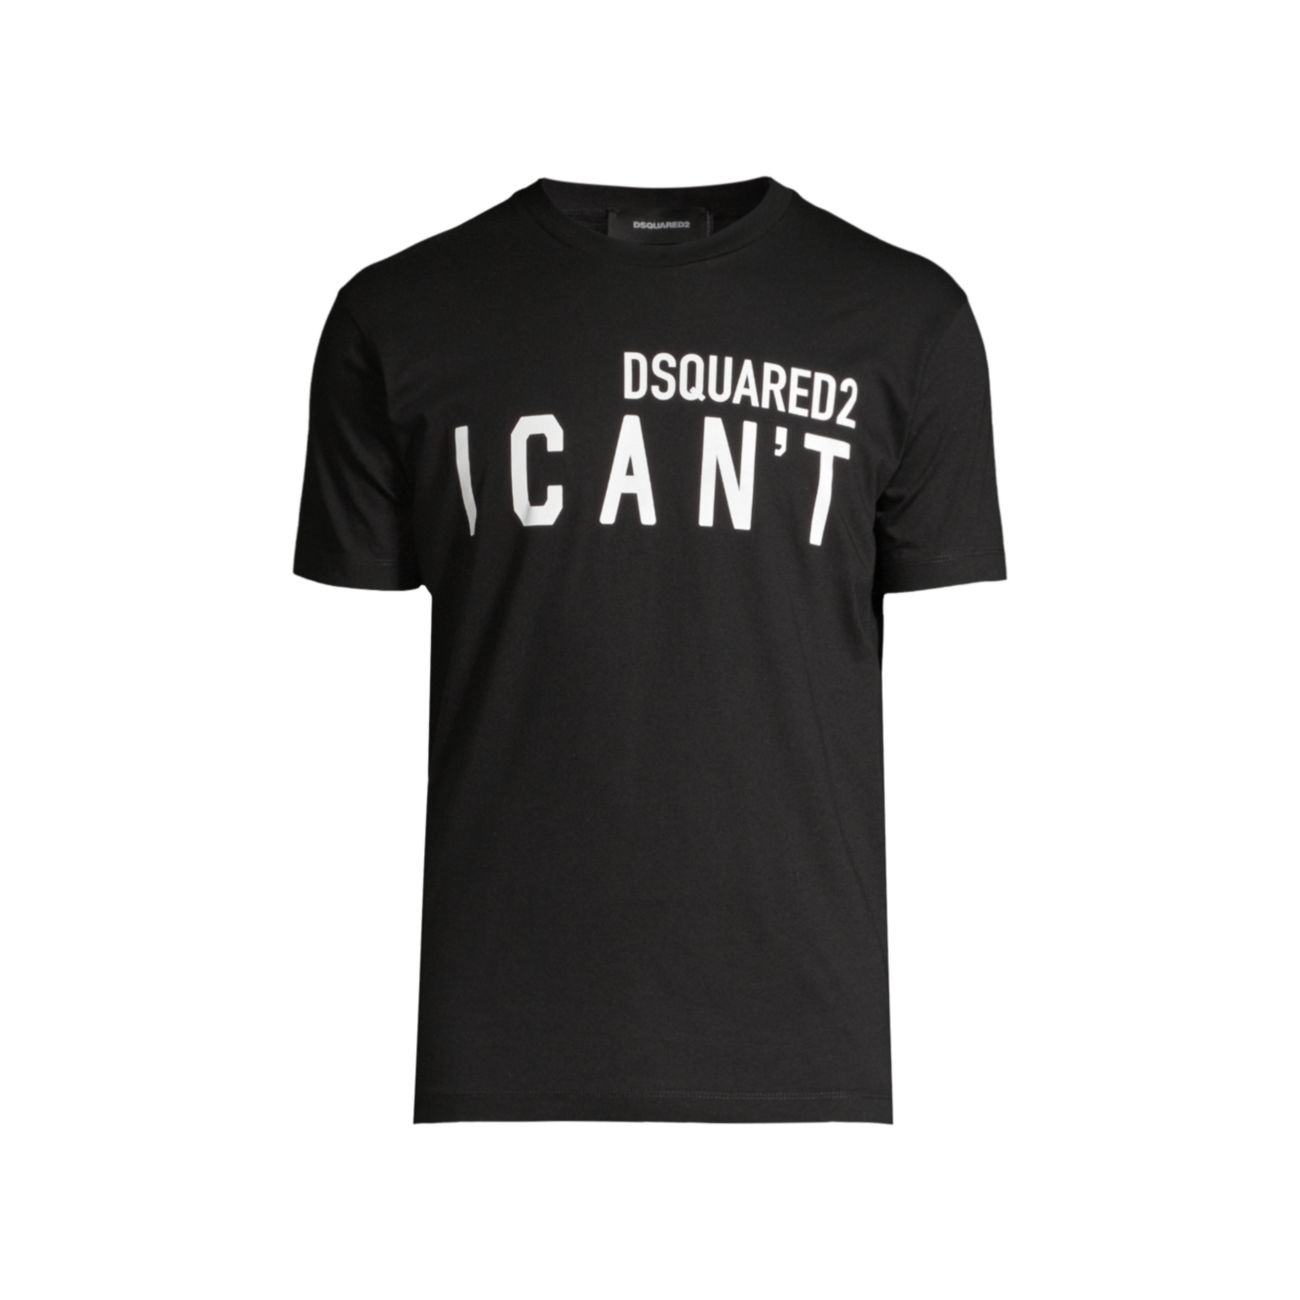 I Can't Graphic T-Shirt DSQUARED2